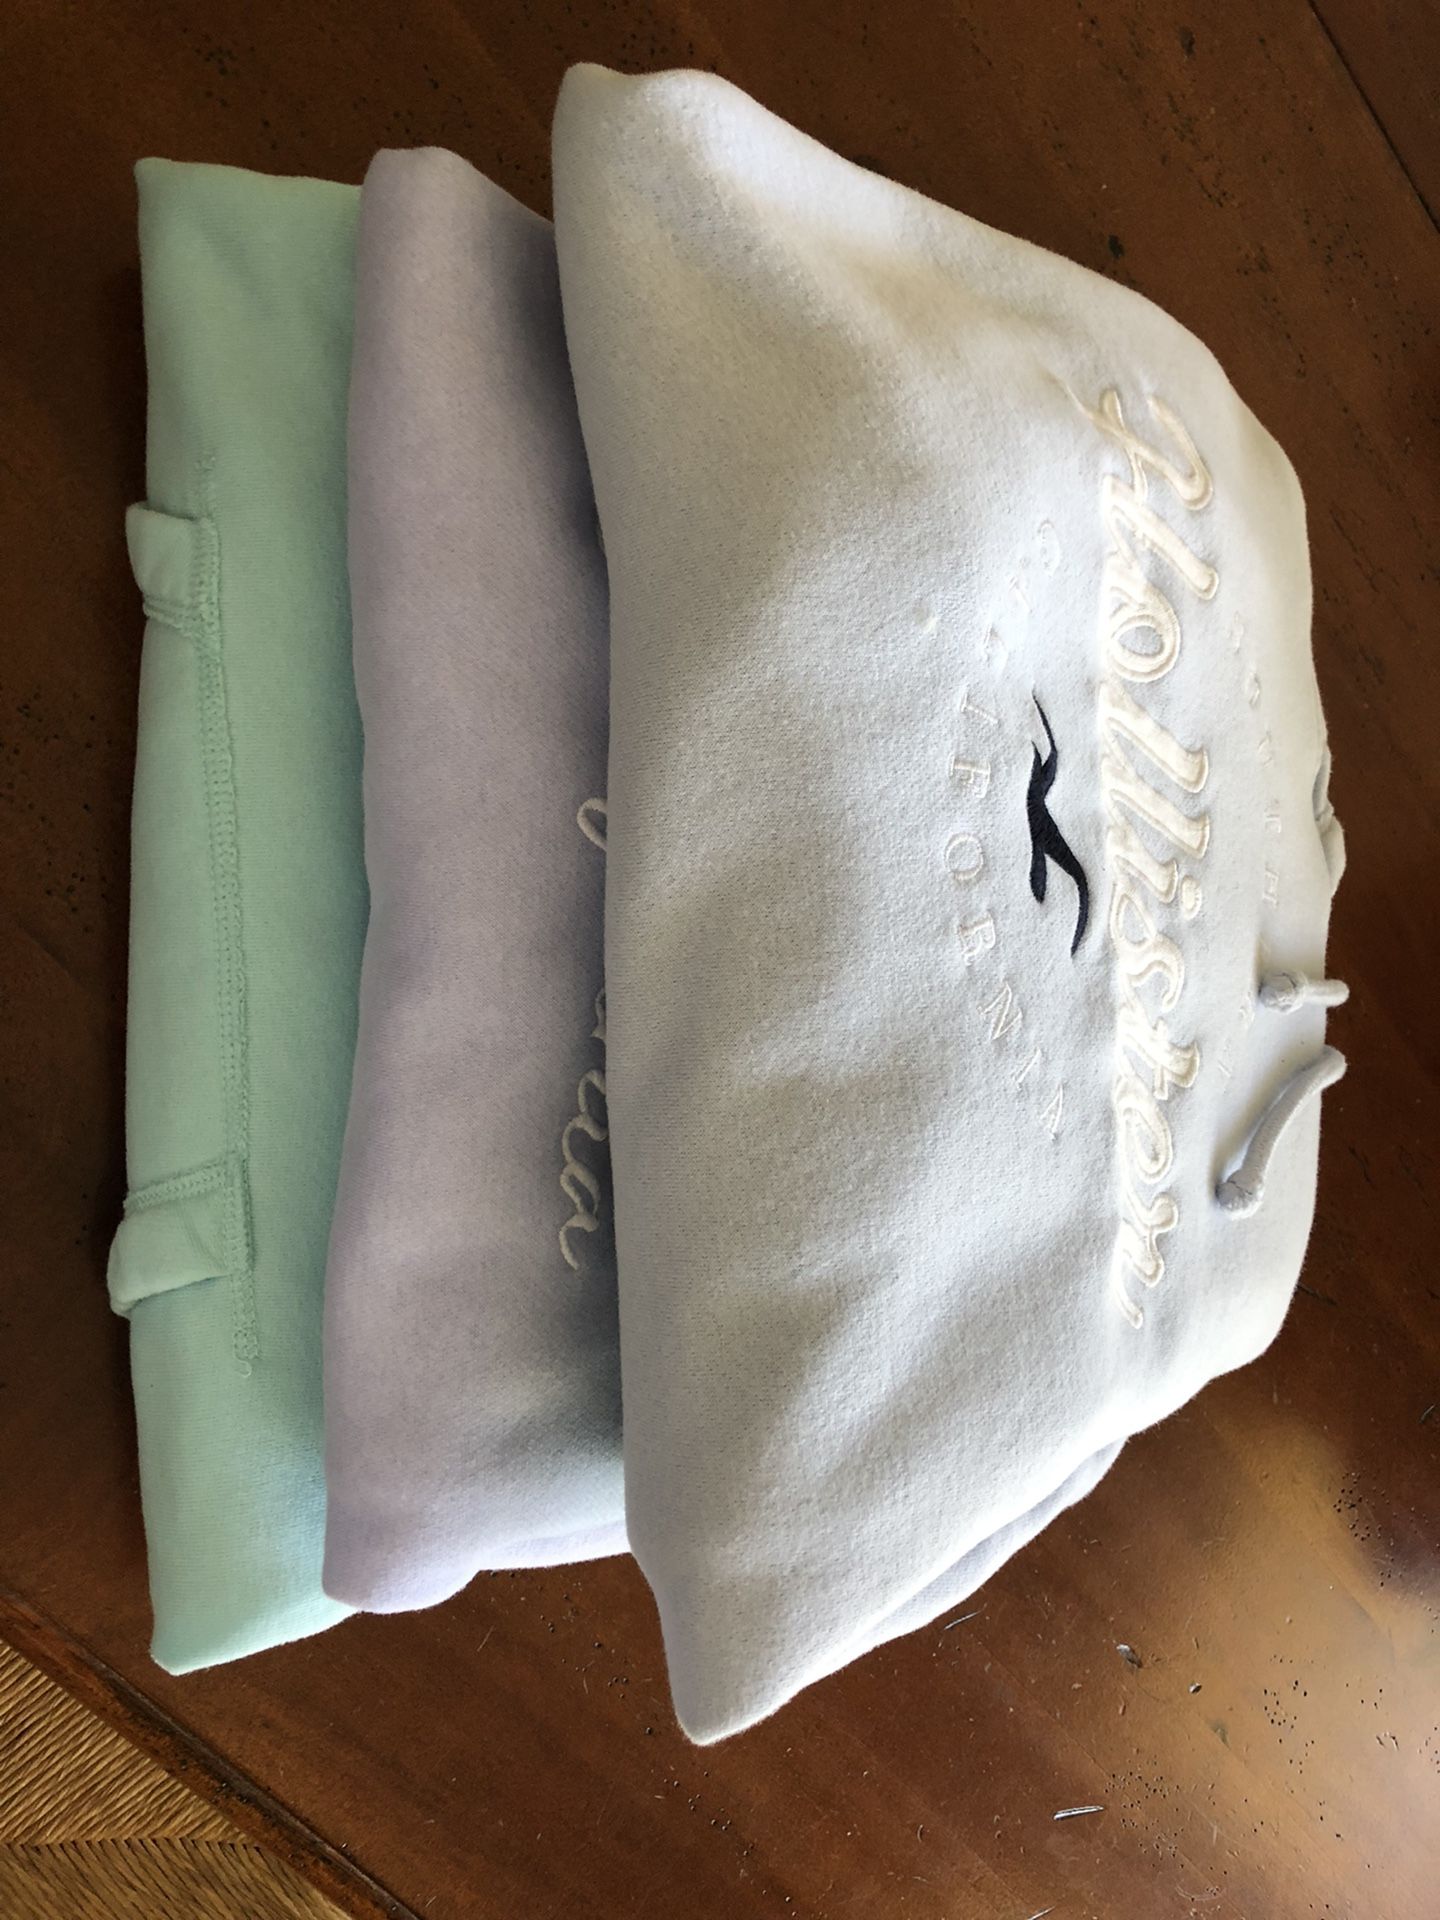 3 Perfect condition hollister Hoodies